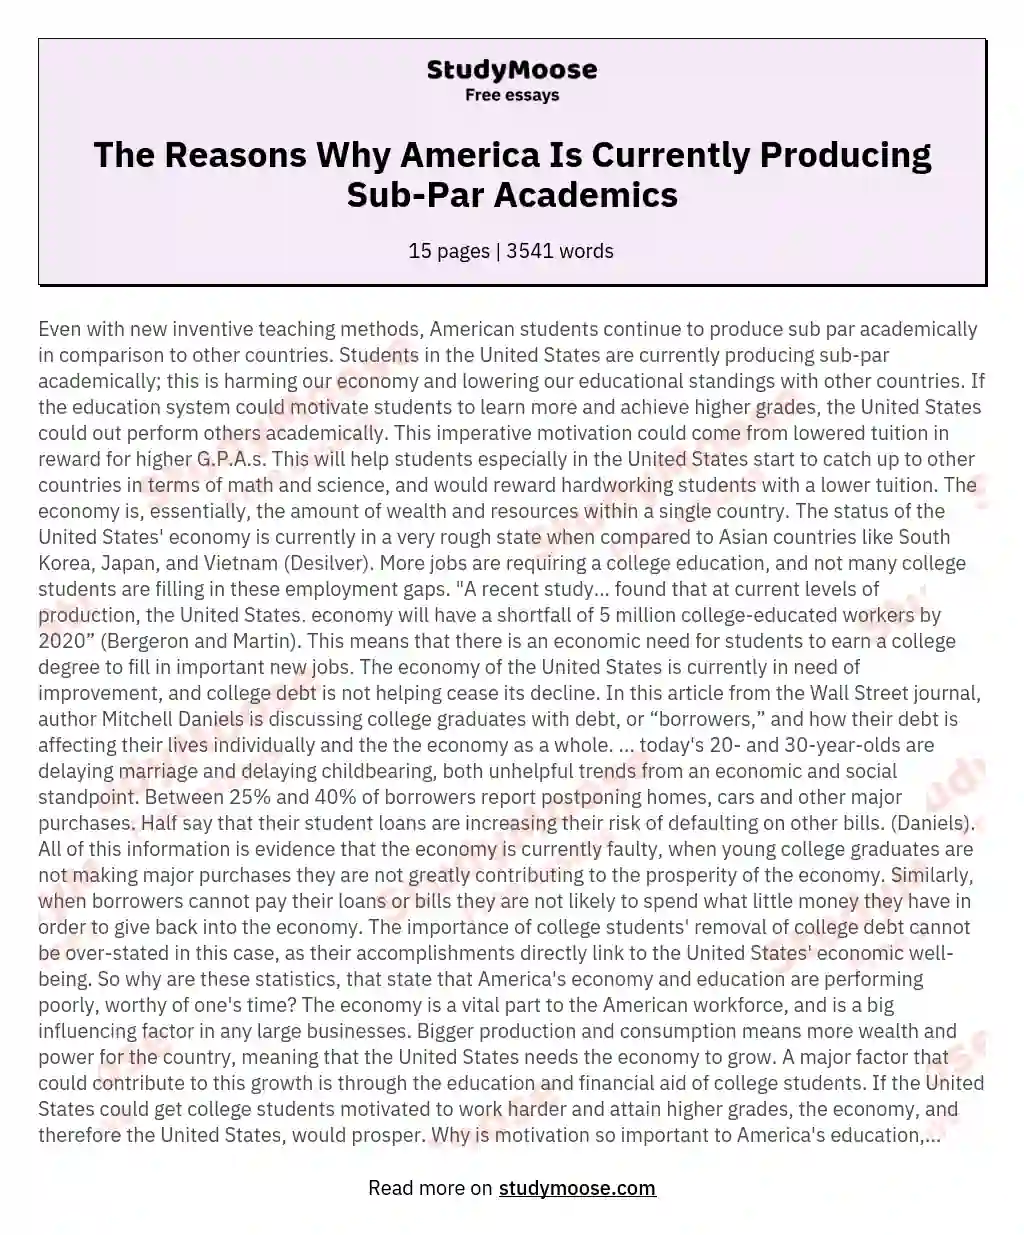 The Reasons Why America Is Currently Producing Sub-Par Academics essay